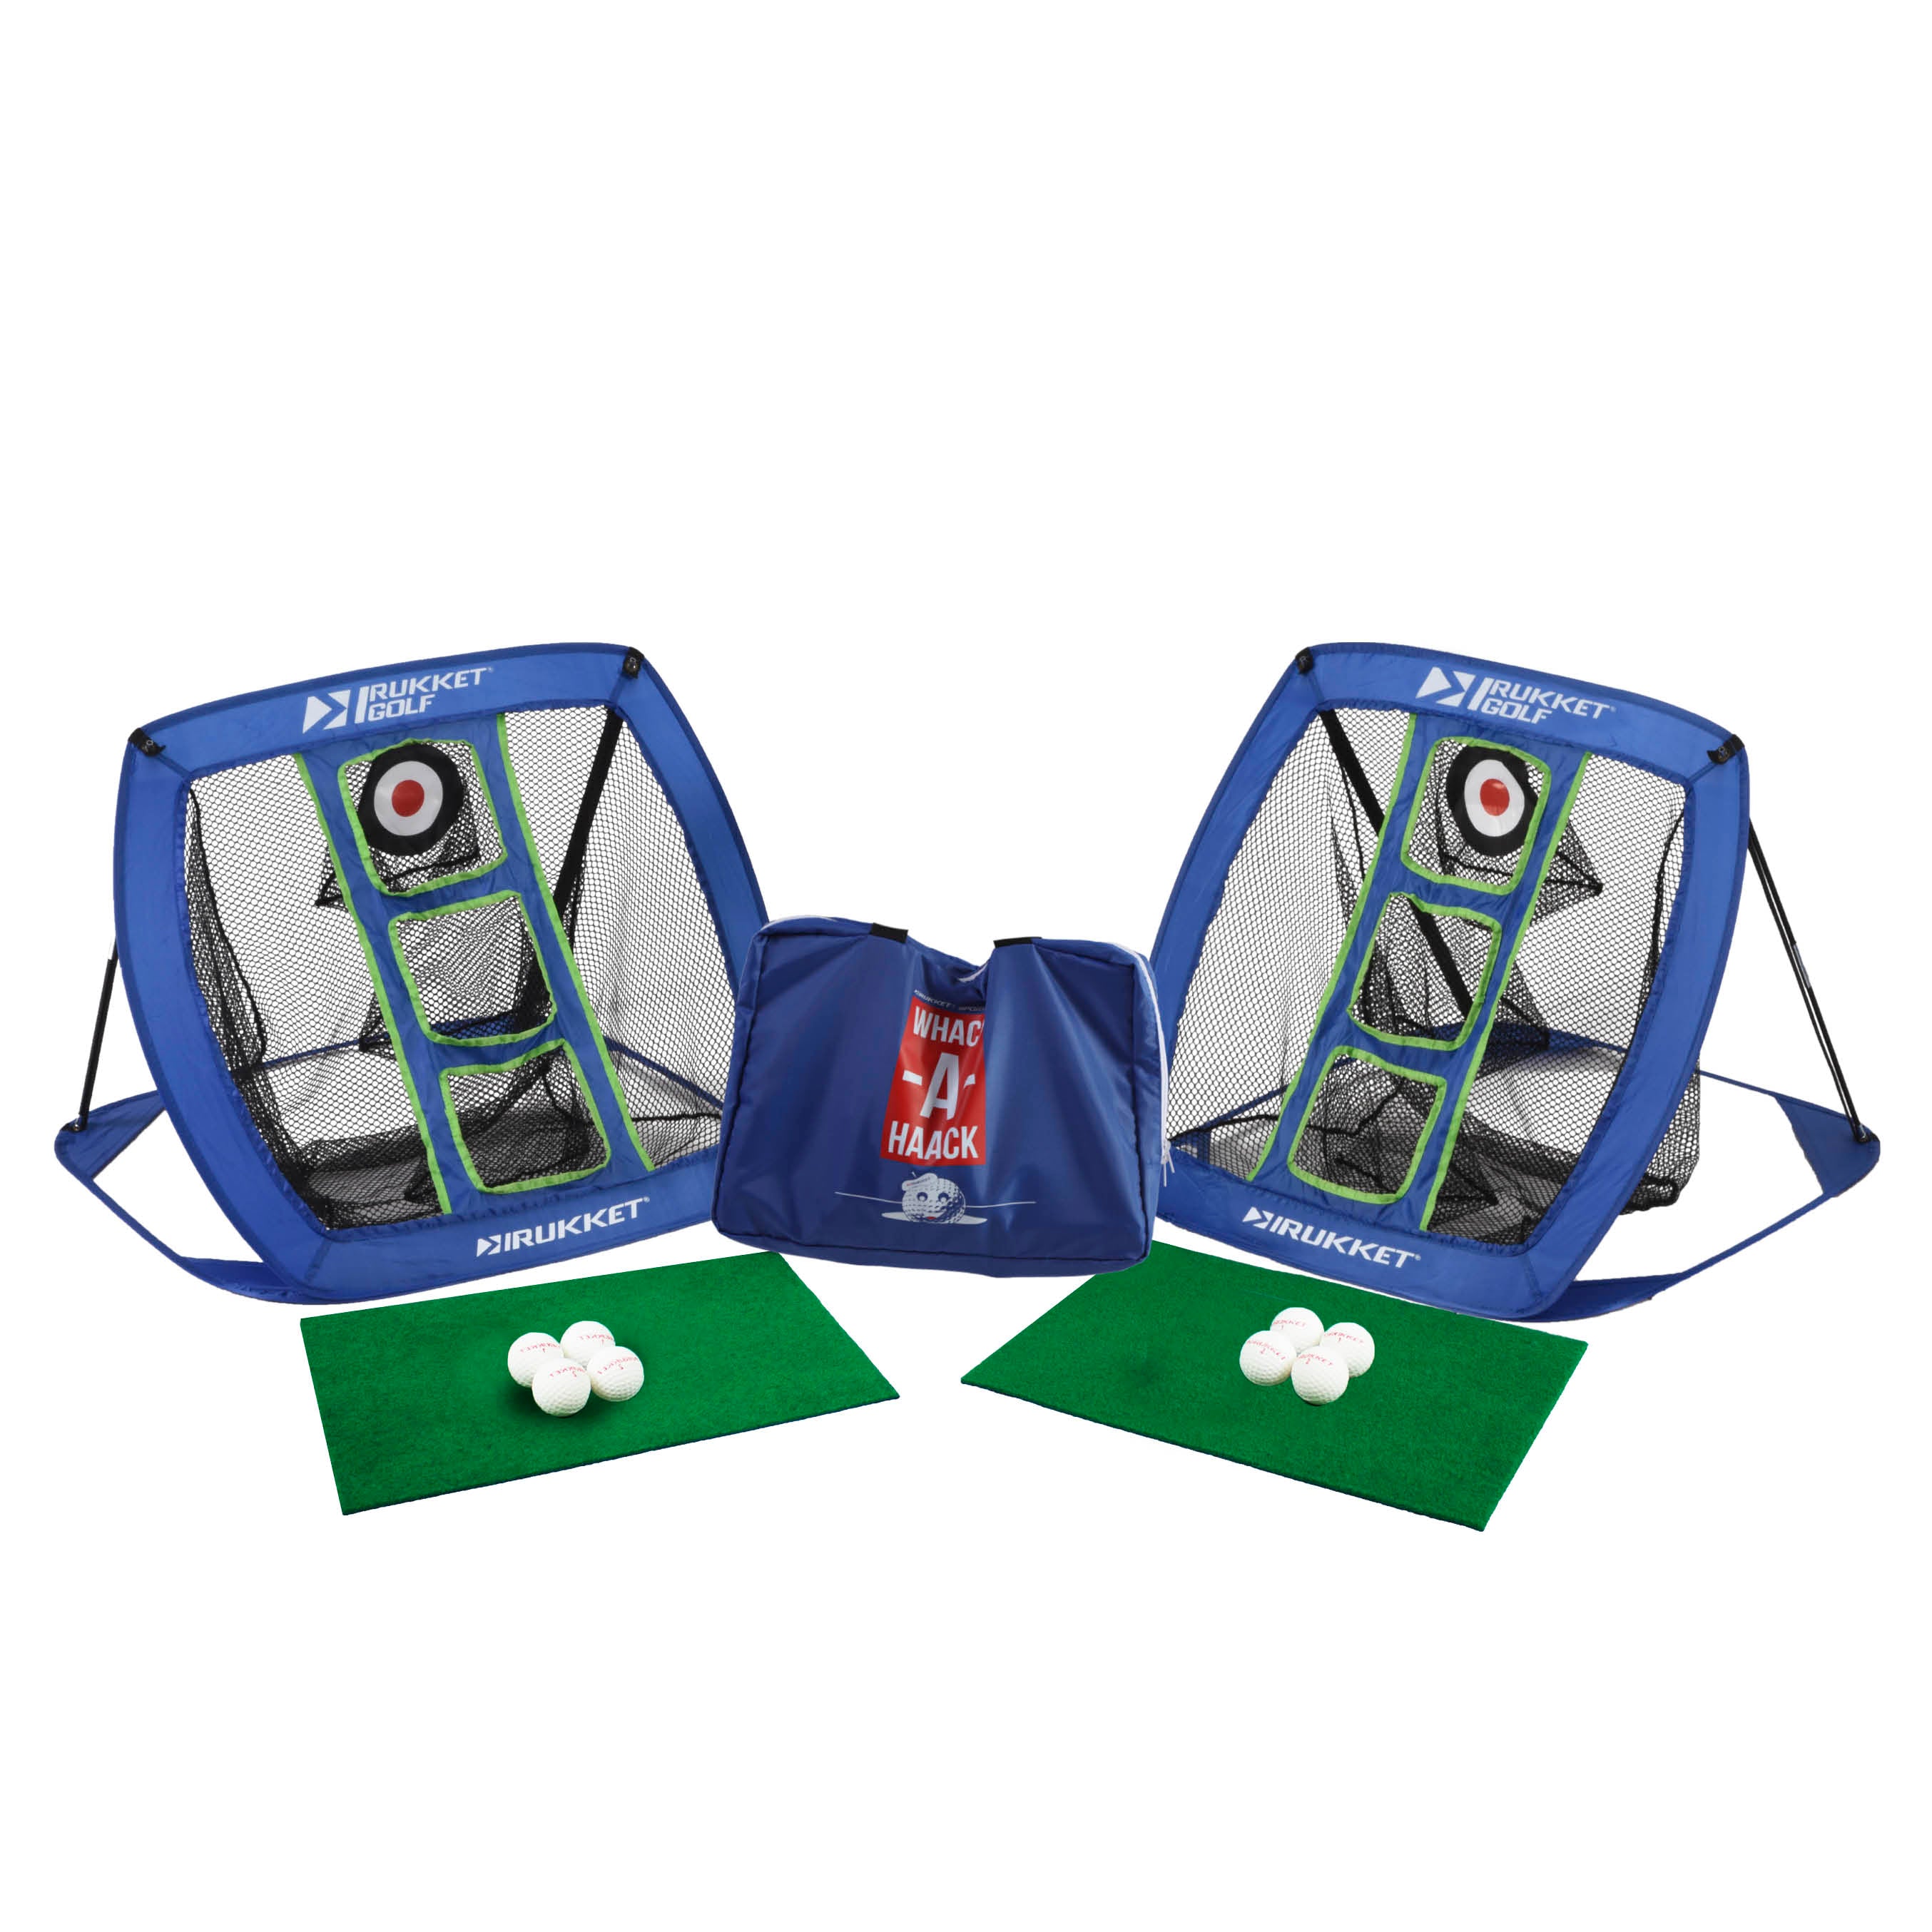 Rukket Golf Chipping Net Cornhole Game, Chip Outdoor/Indoor at Beach, Backyard or Tailgate, Golfing Practice Games for Adults and Kids (Royal Blue)